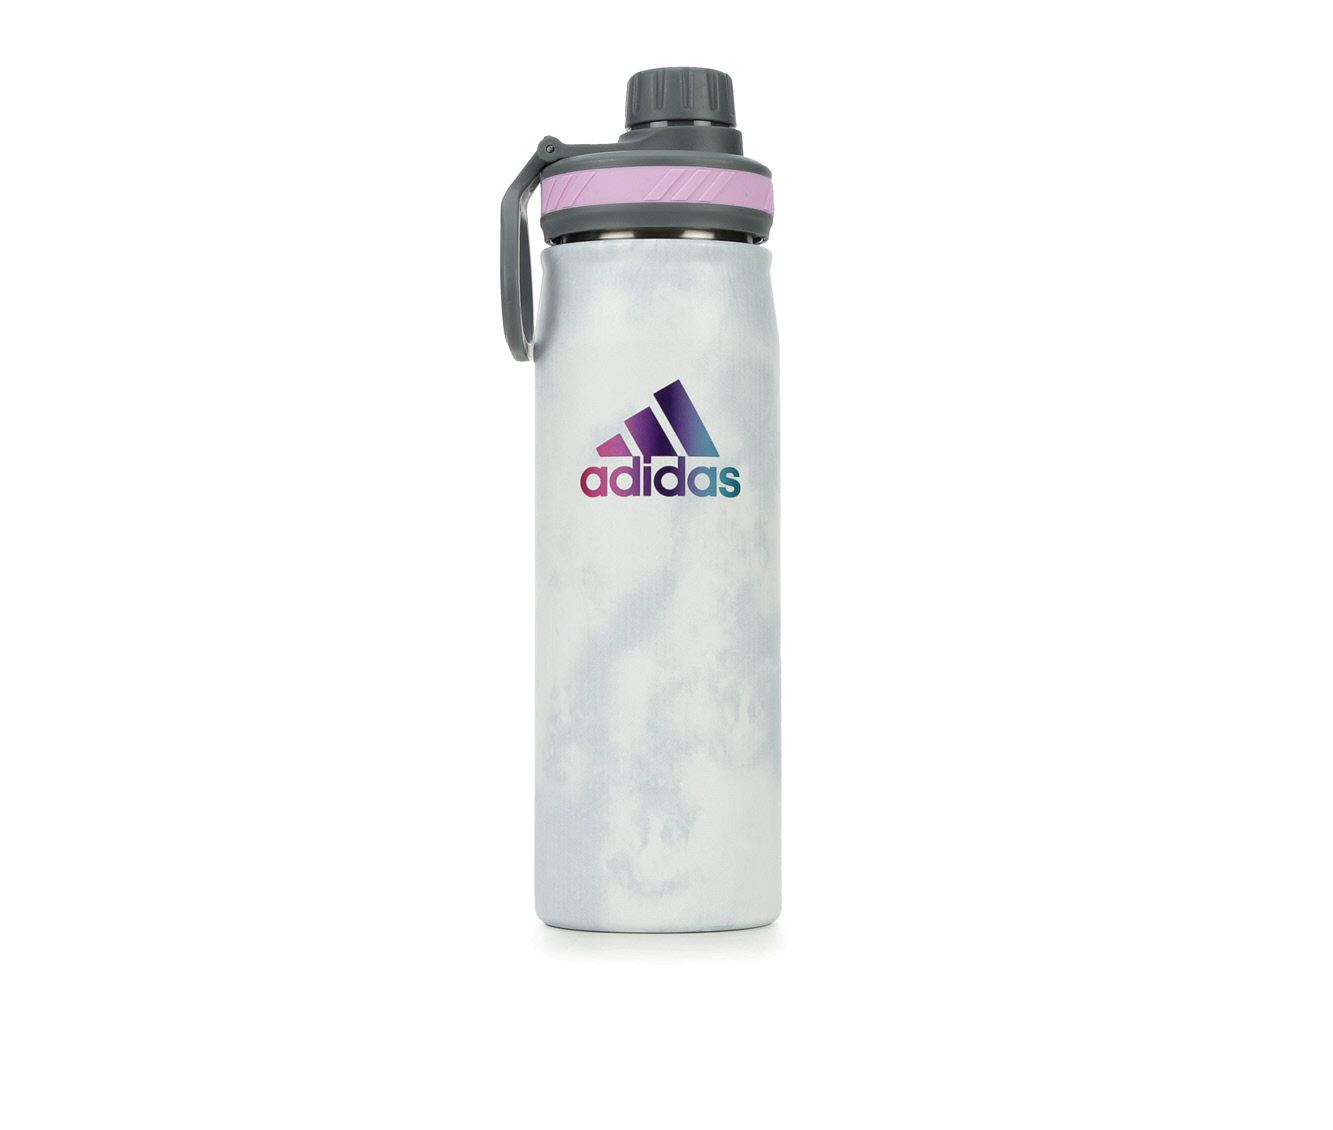 Adidas accessories water bottles | Shoe Carnival